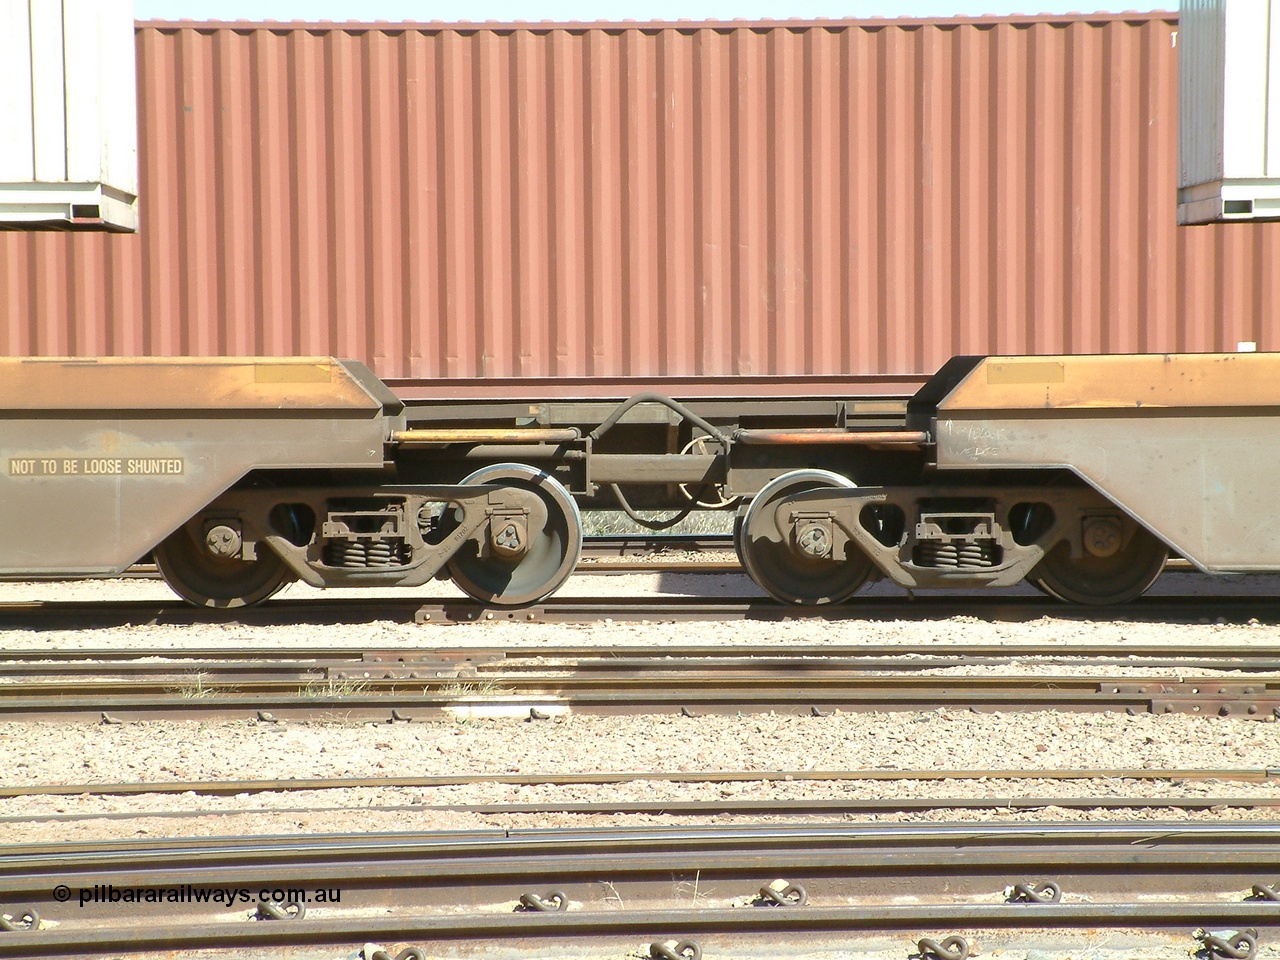 030404 104454
Port Augusta, Spencer Junction yard, RQZY type five unit bar coupled well container waggon RQZY 7050 built as one of a batch of thirty two by Goninan NSW for National Rail, detail of the bar coupling arrangement. 4th April, 2003.
Keywords: RQZY-type;RQZY7050;Goninan-NSW;1995-96/32-16;